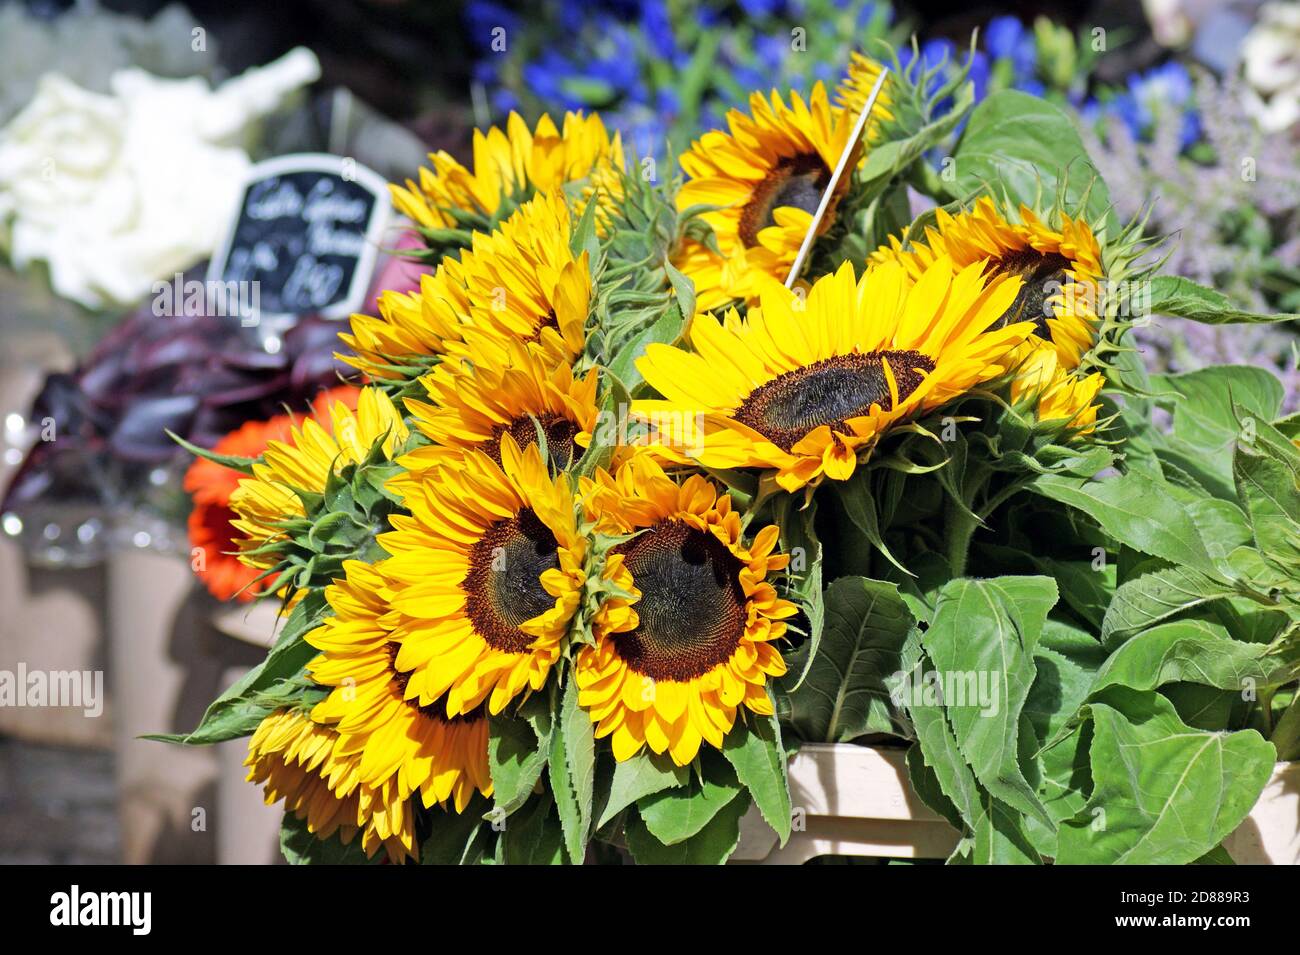 A bouquet of sunflowers on sale in an outdoor market stall in Amsterdam, Holland. Stock Photo